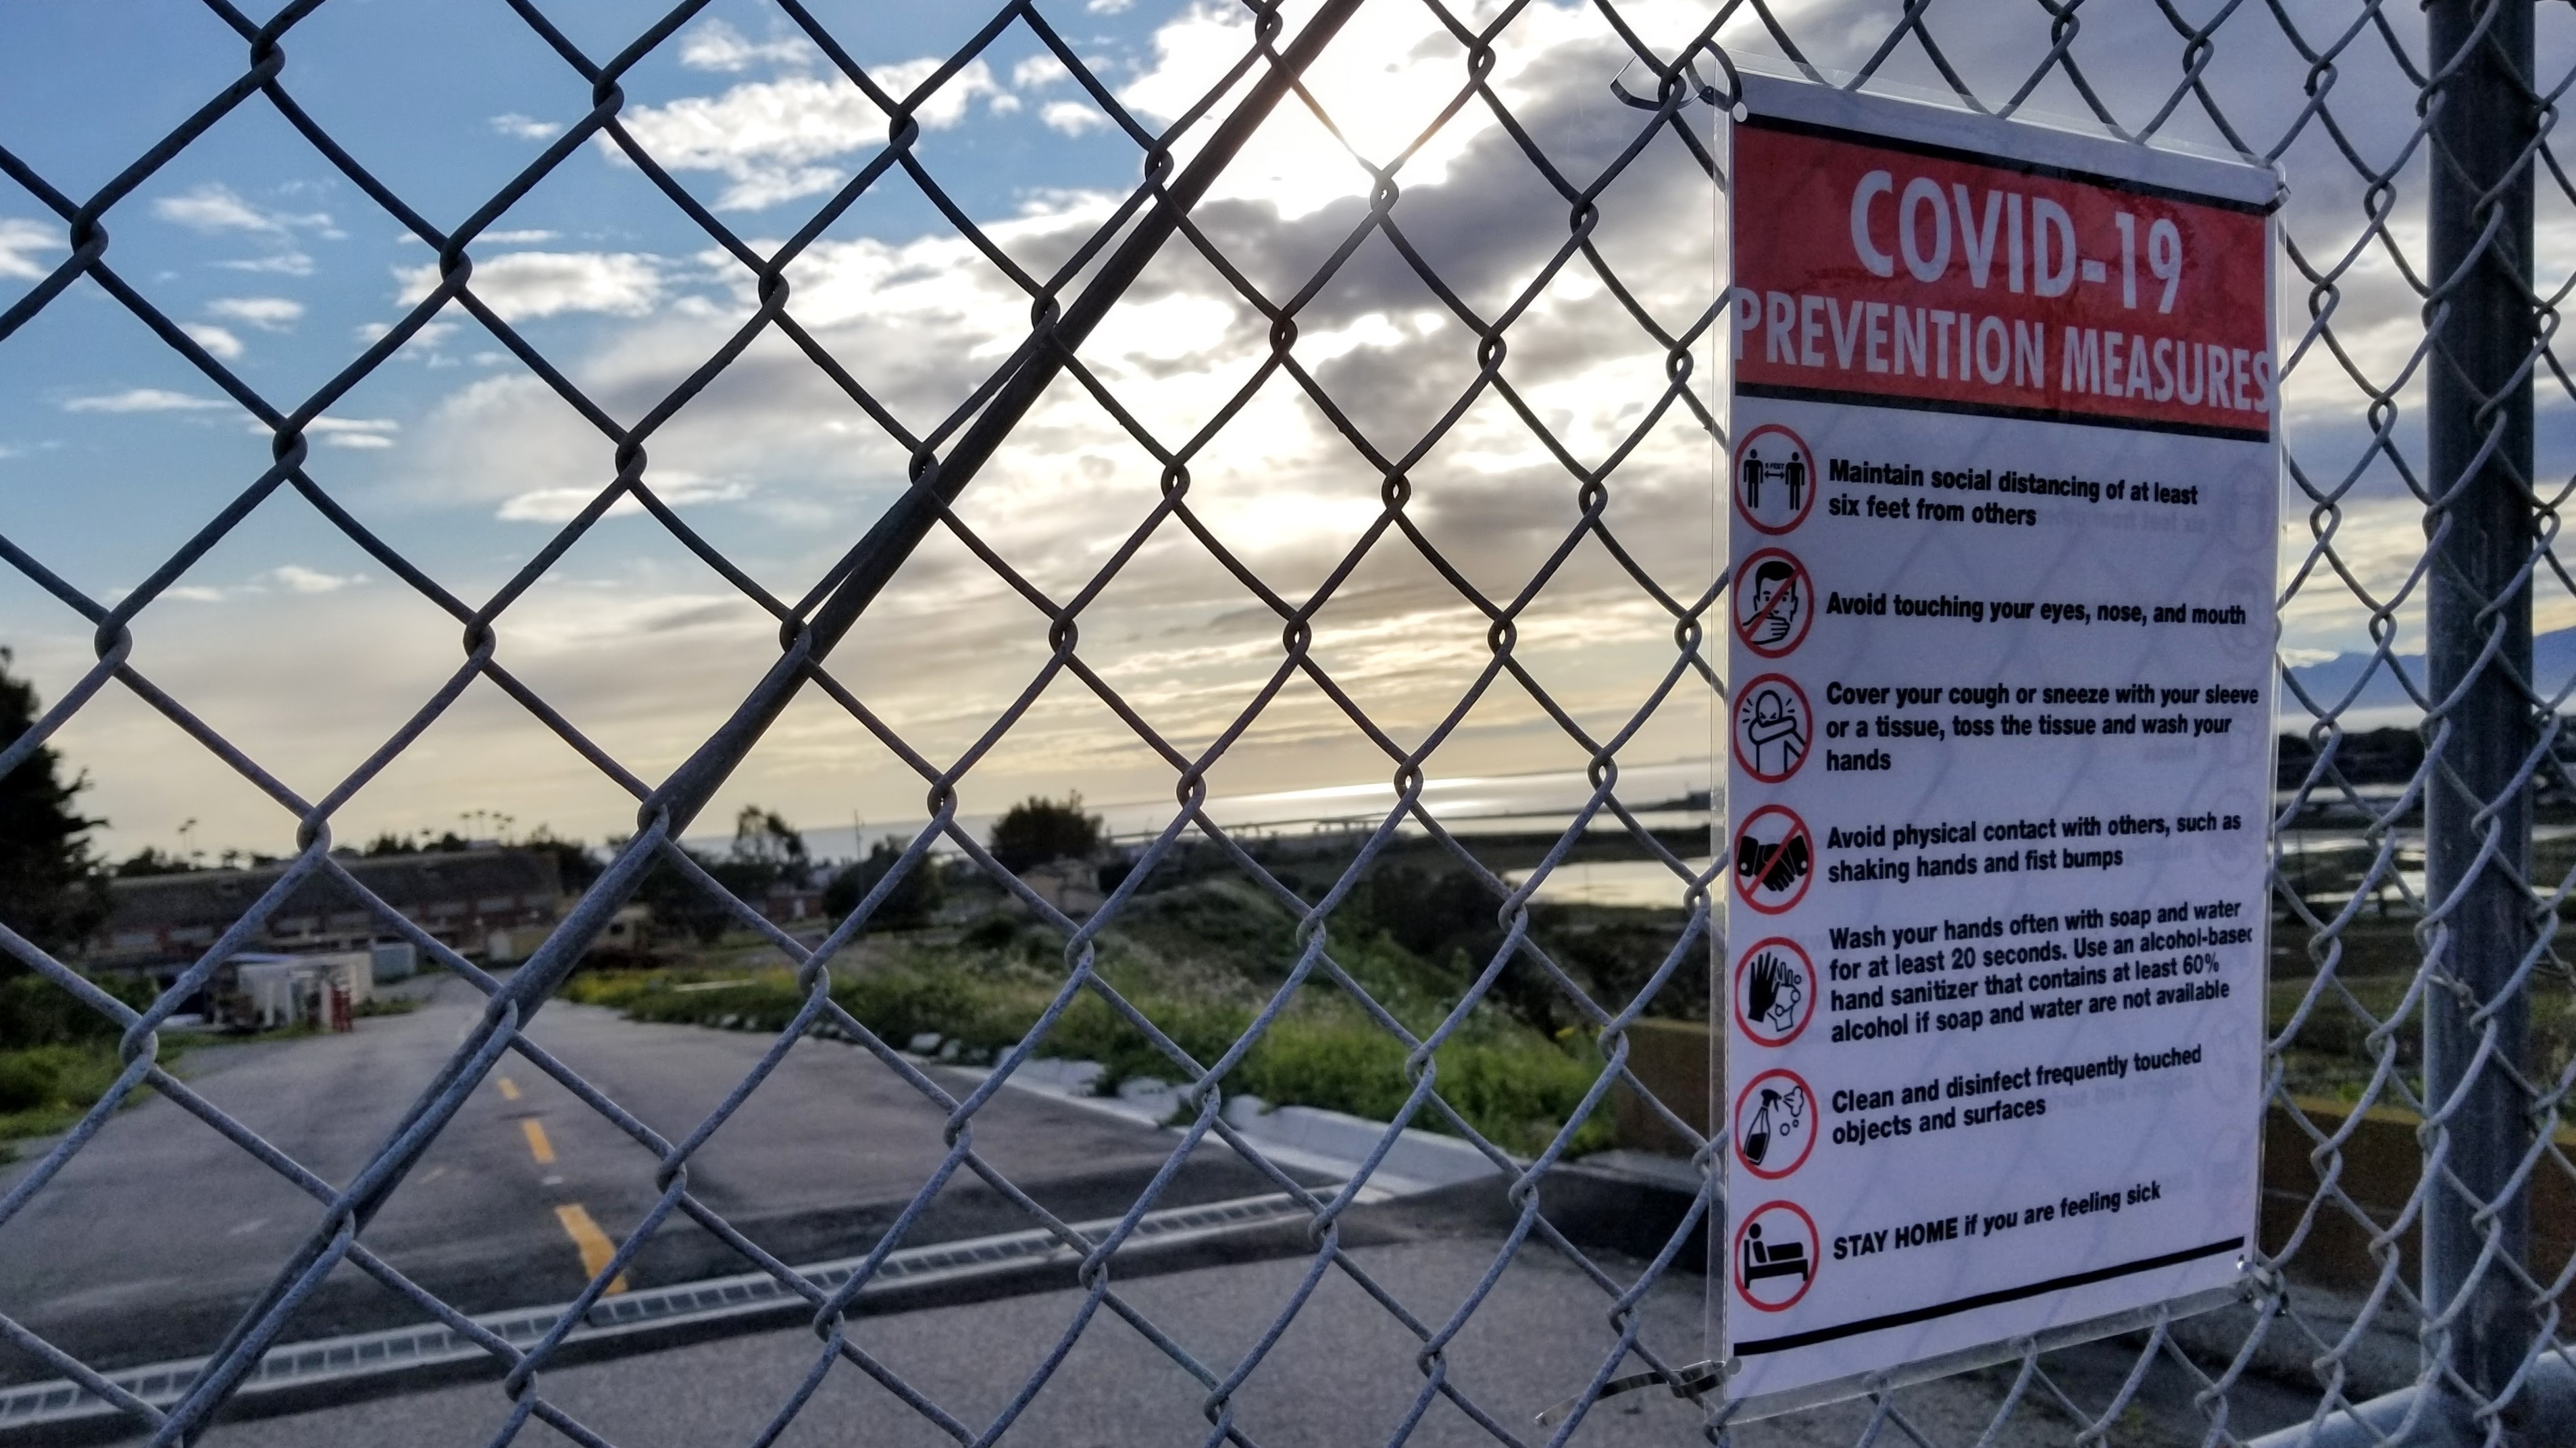 A photo of a Covid-19 fence sign.